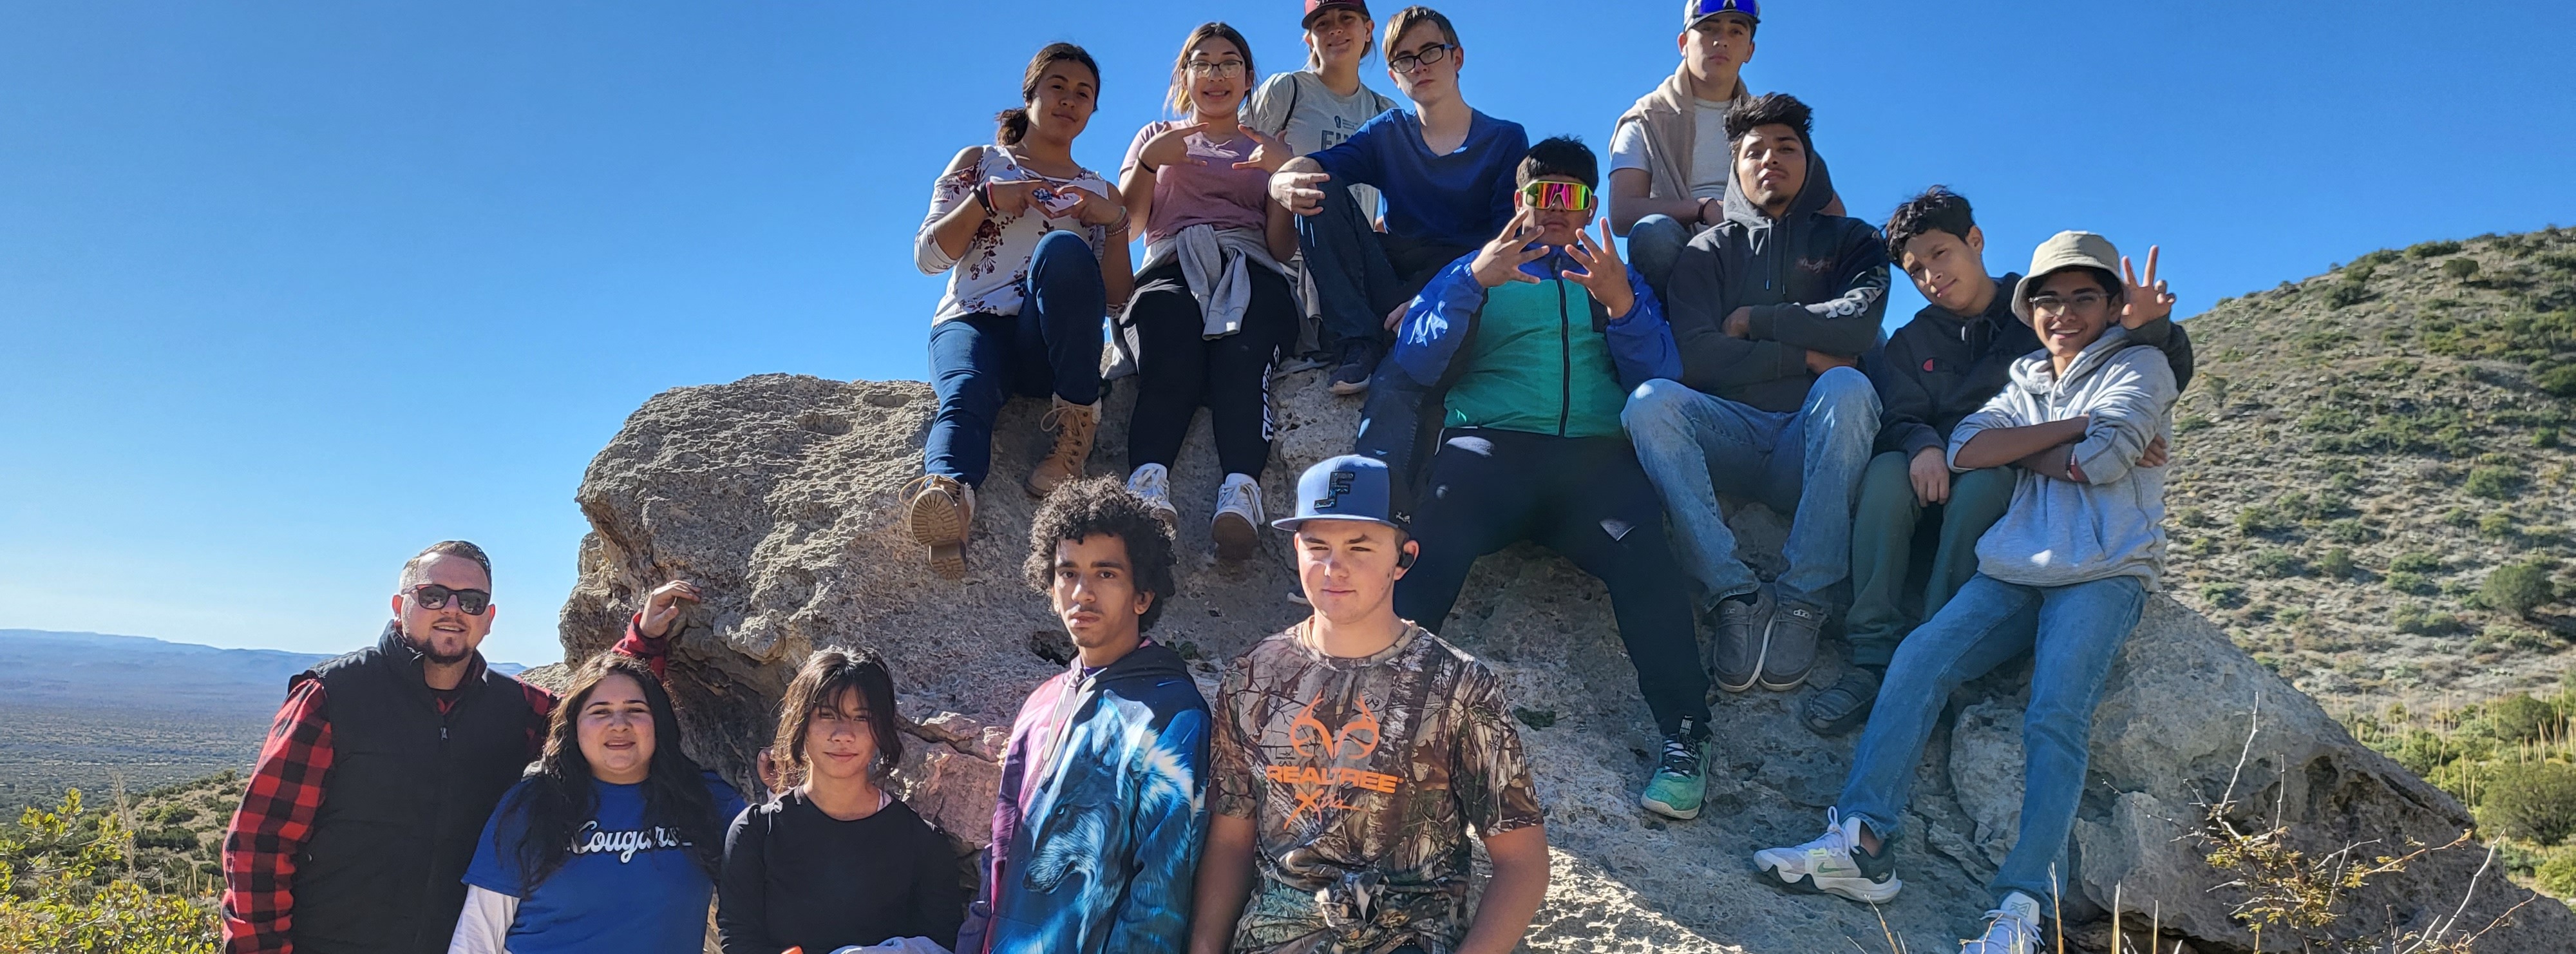 Students posing on a large rock while out in the wilderness on a trip